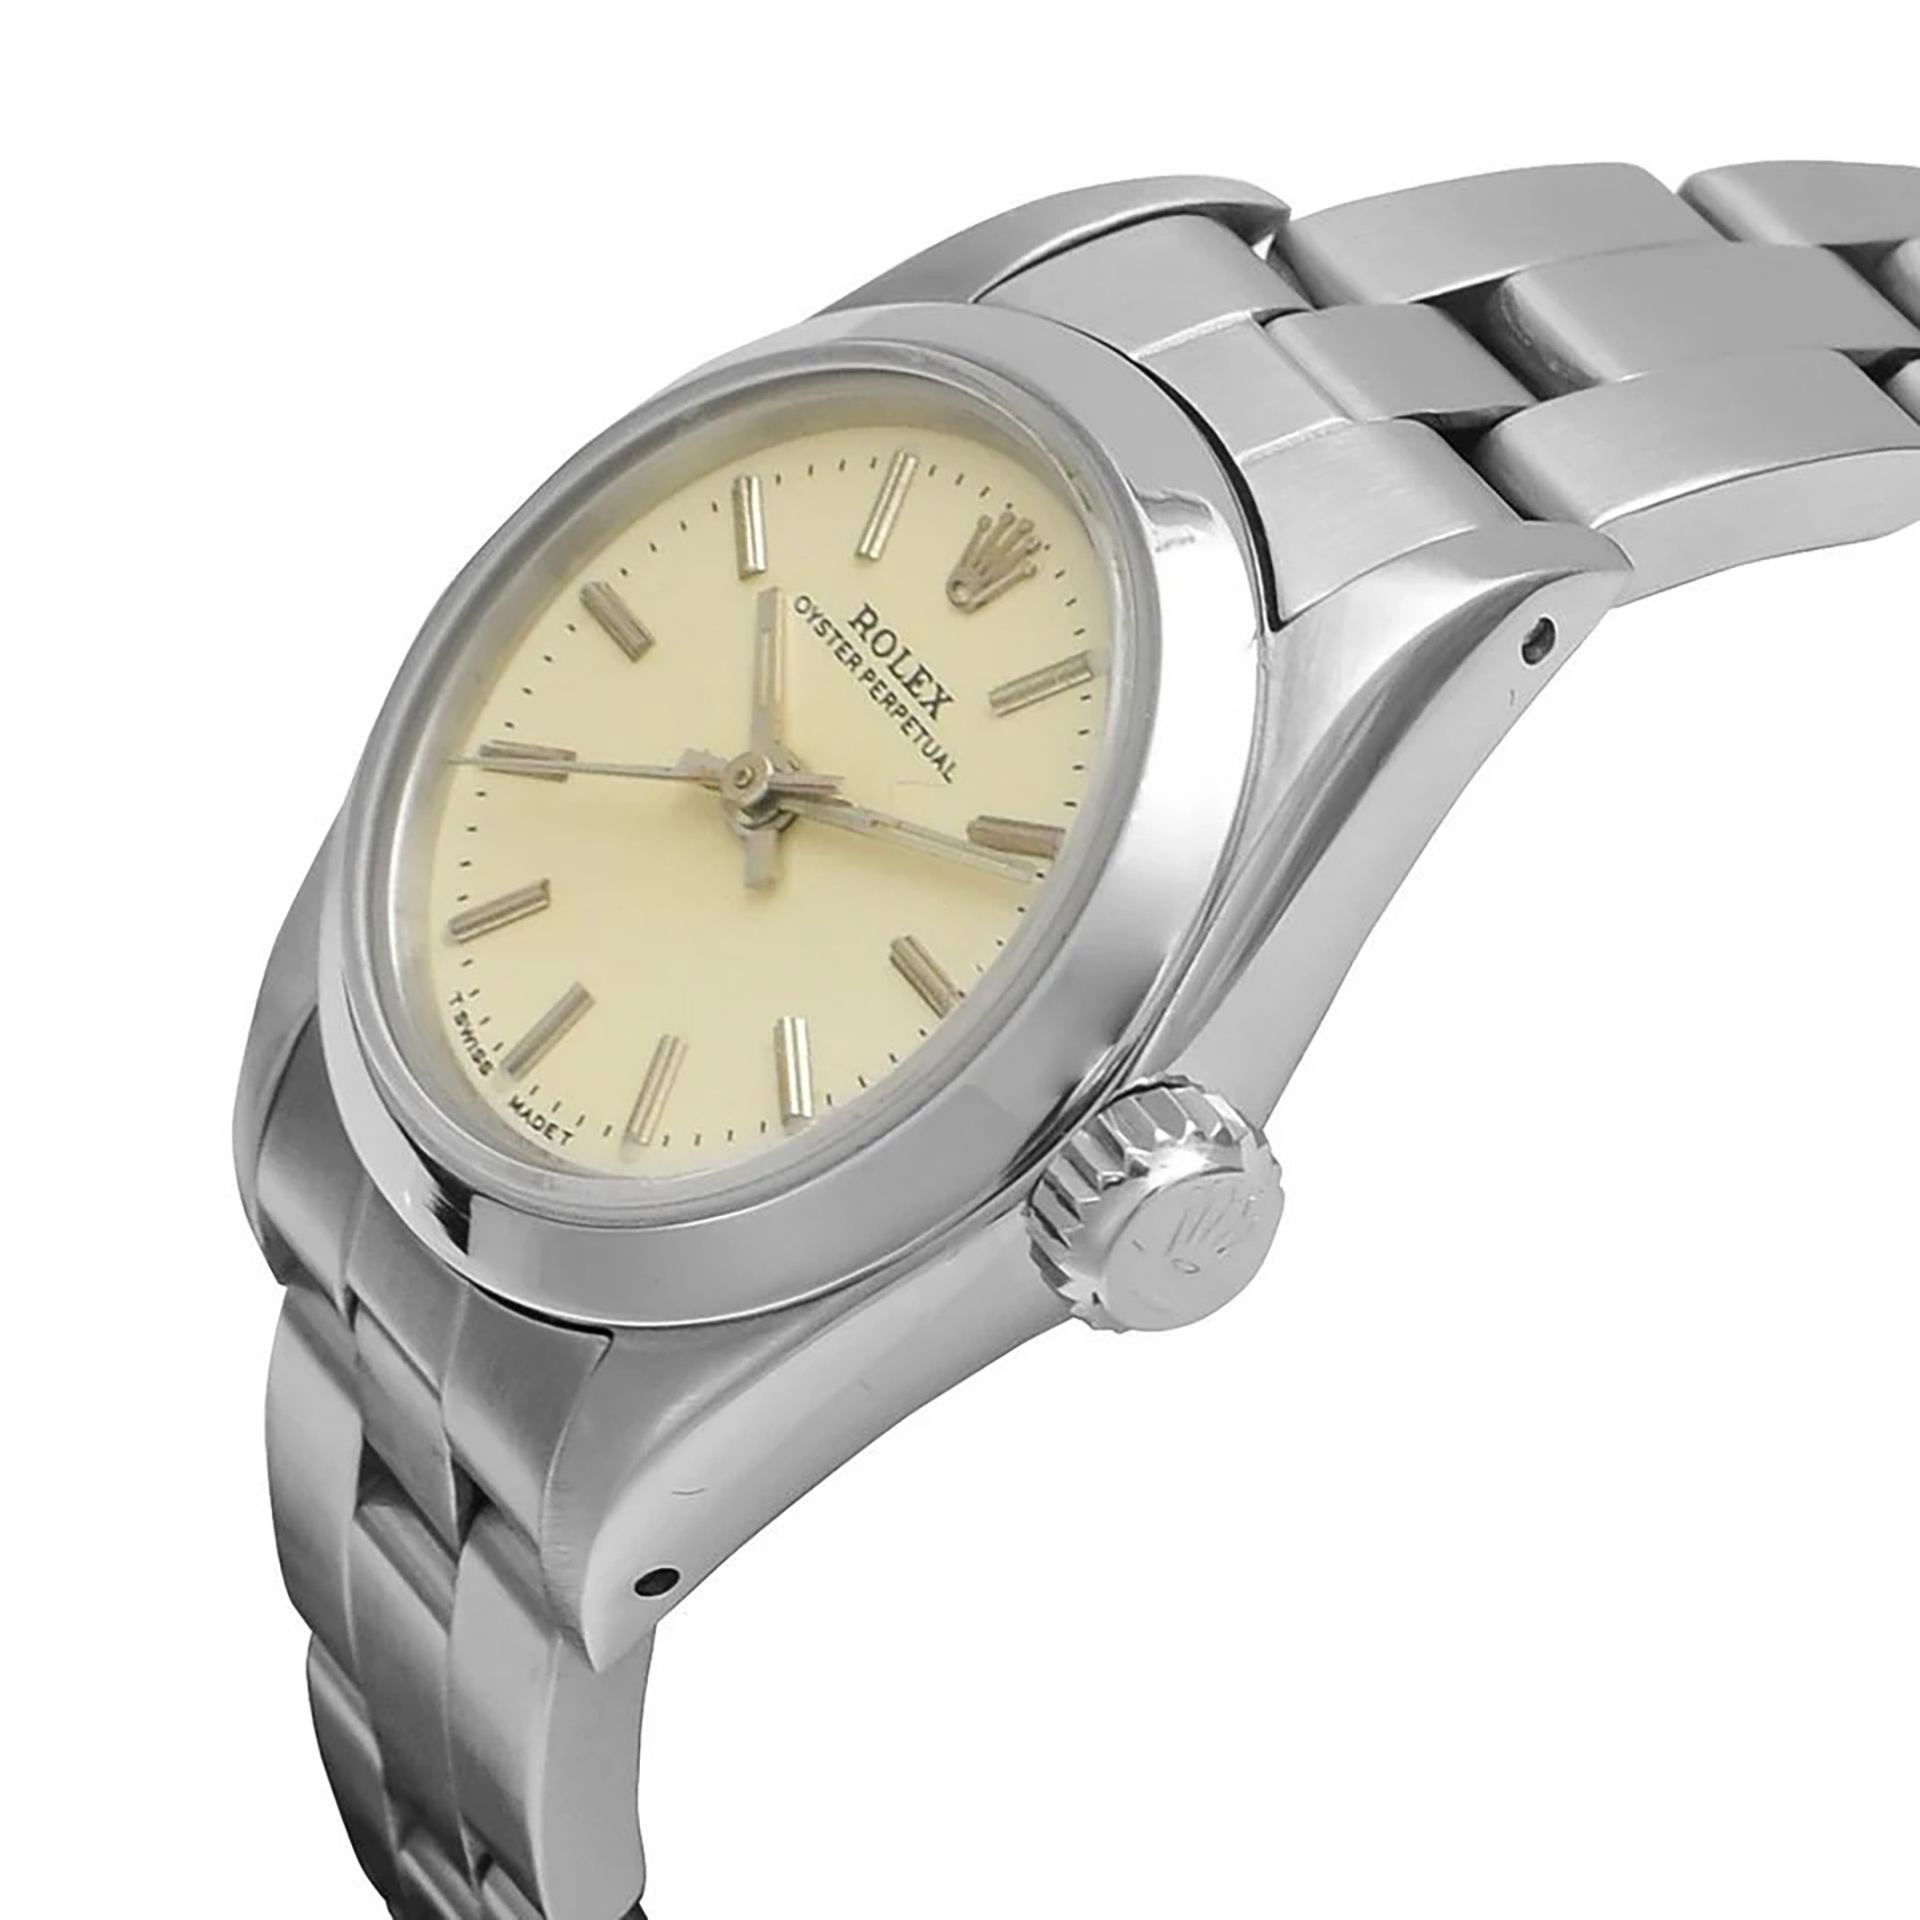 Vintage Rolex in steel Oyster Perpetual Lady model - Image 2 of 5